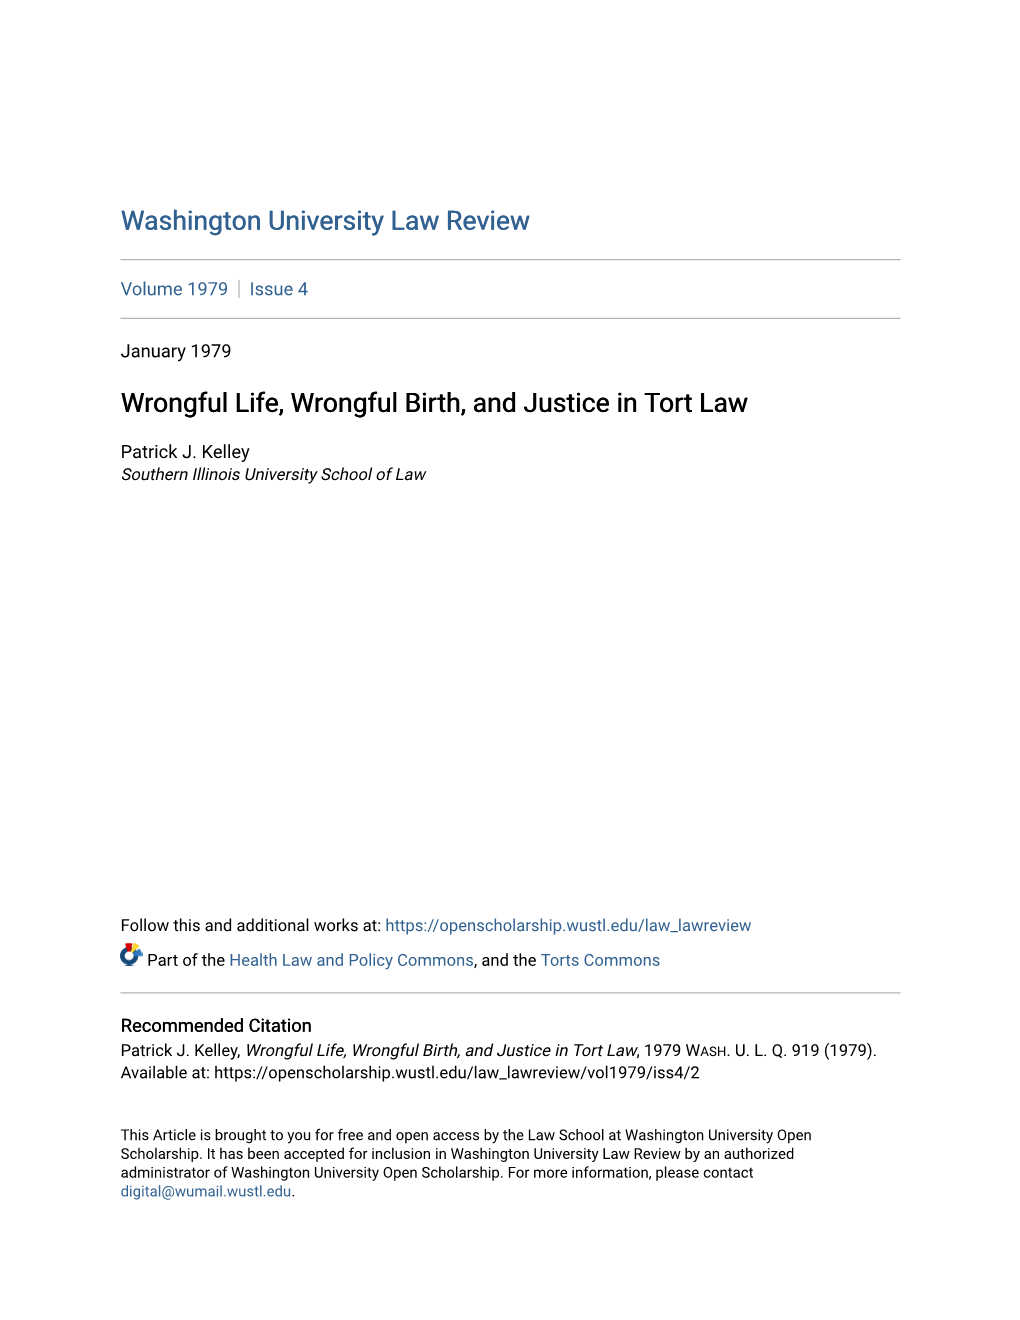 Wrongful Life, Wrongful Birth, and Justice in Tort Law